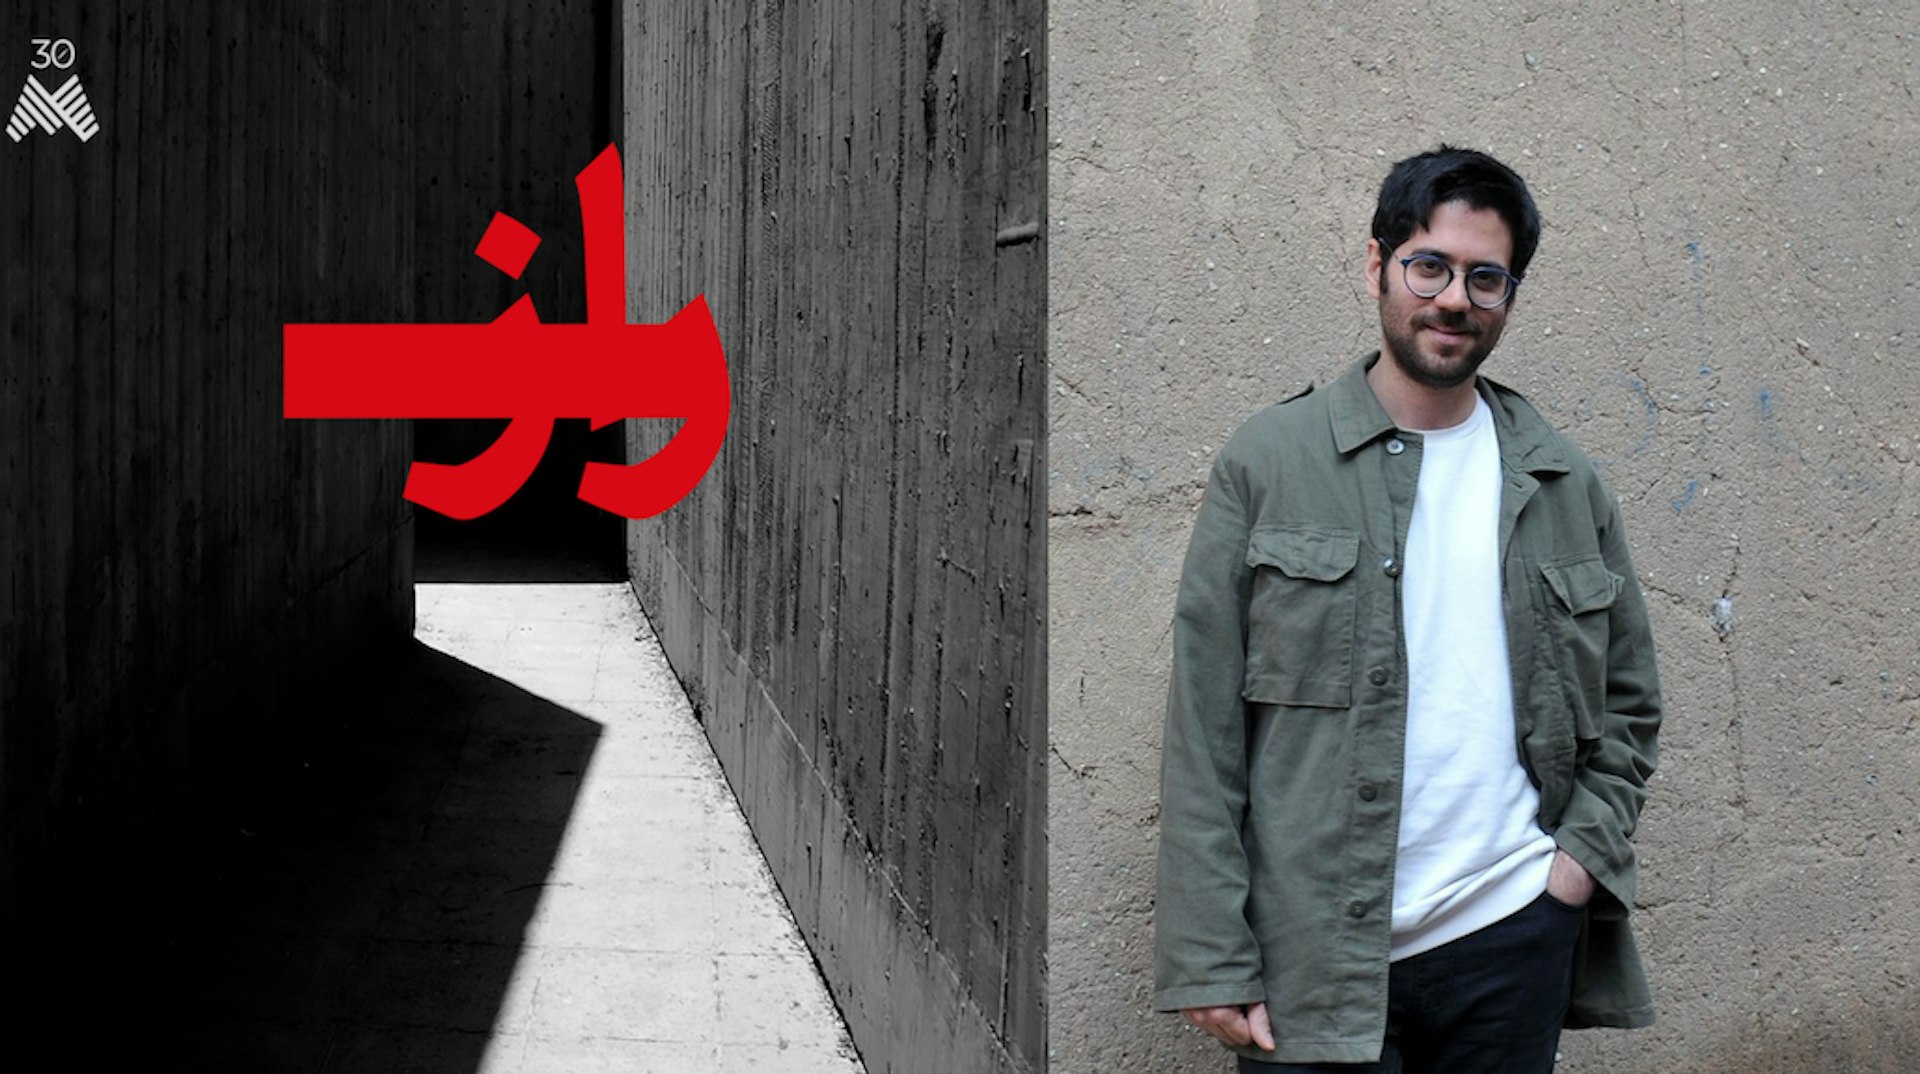 The record label bringing Iranian music to the world